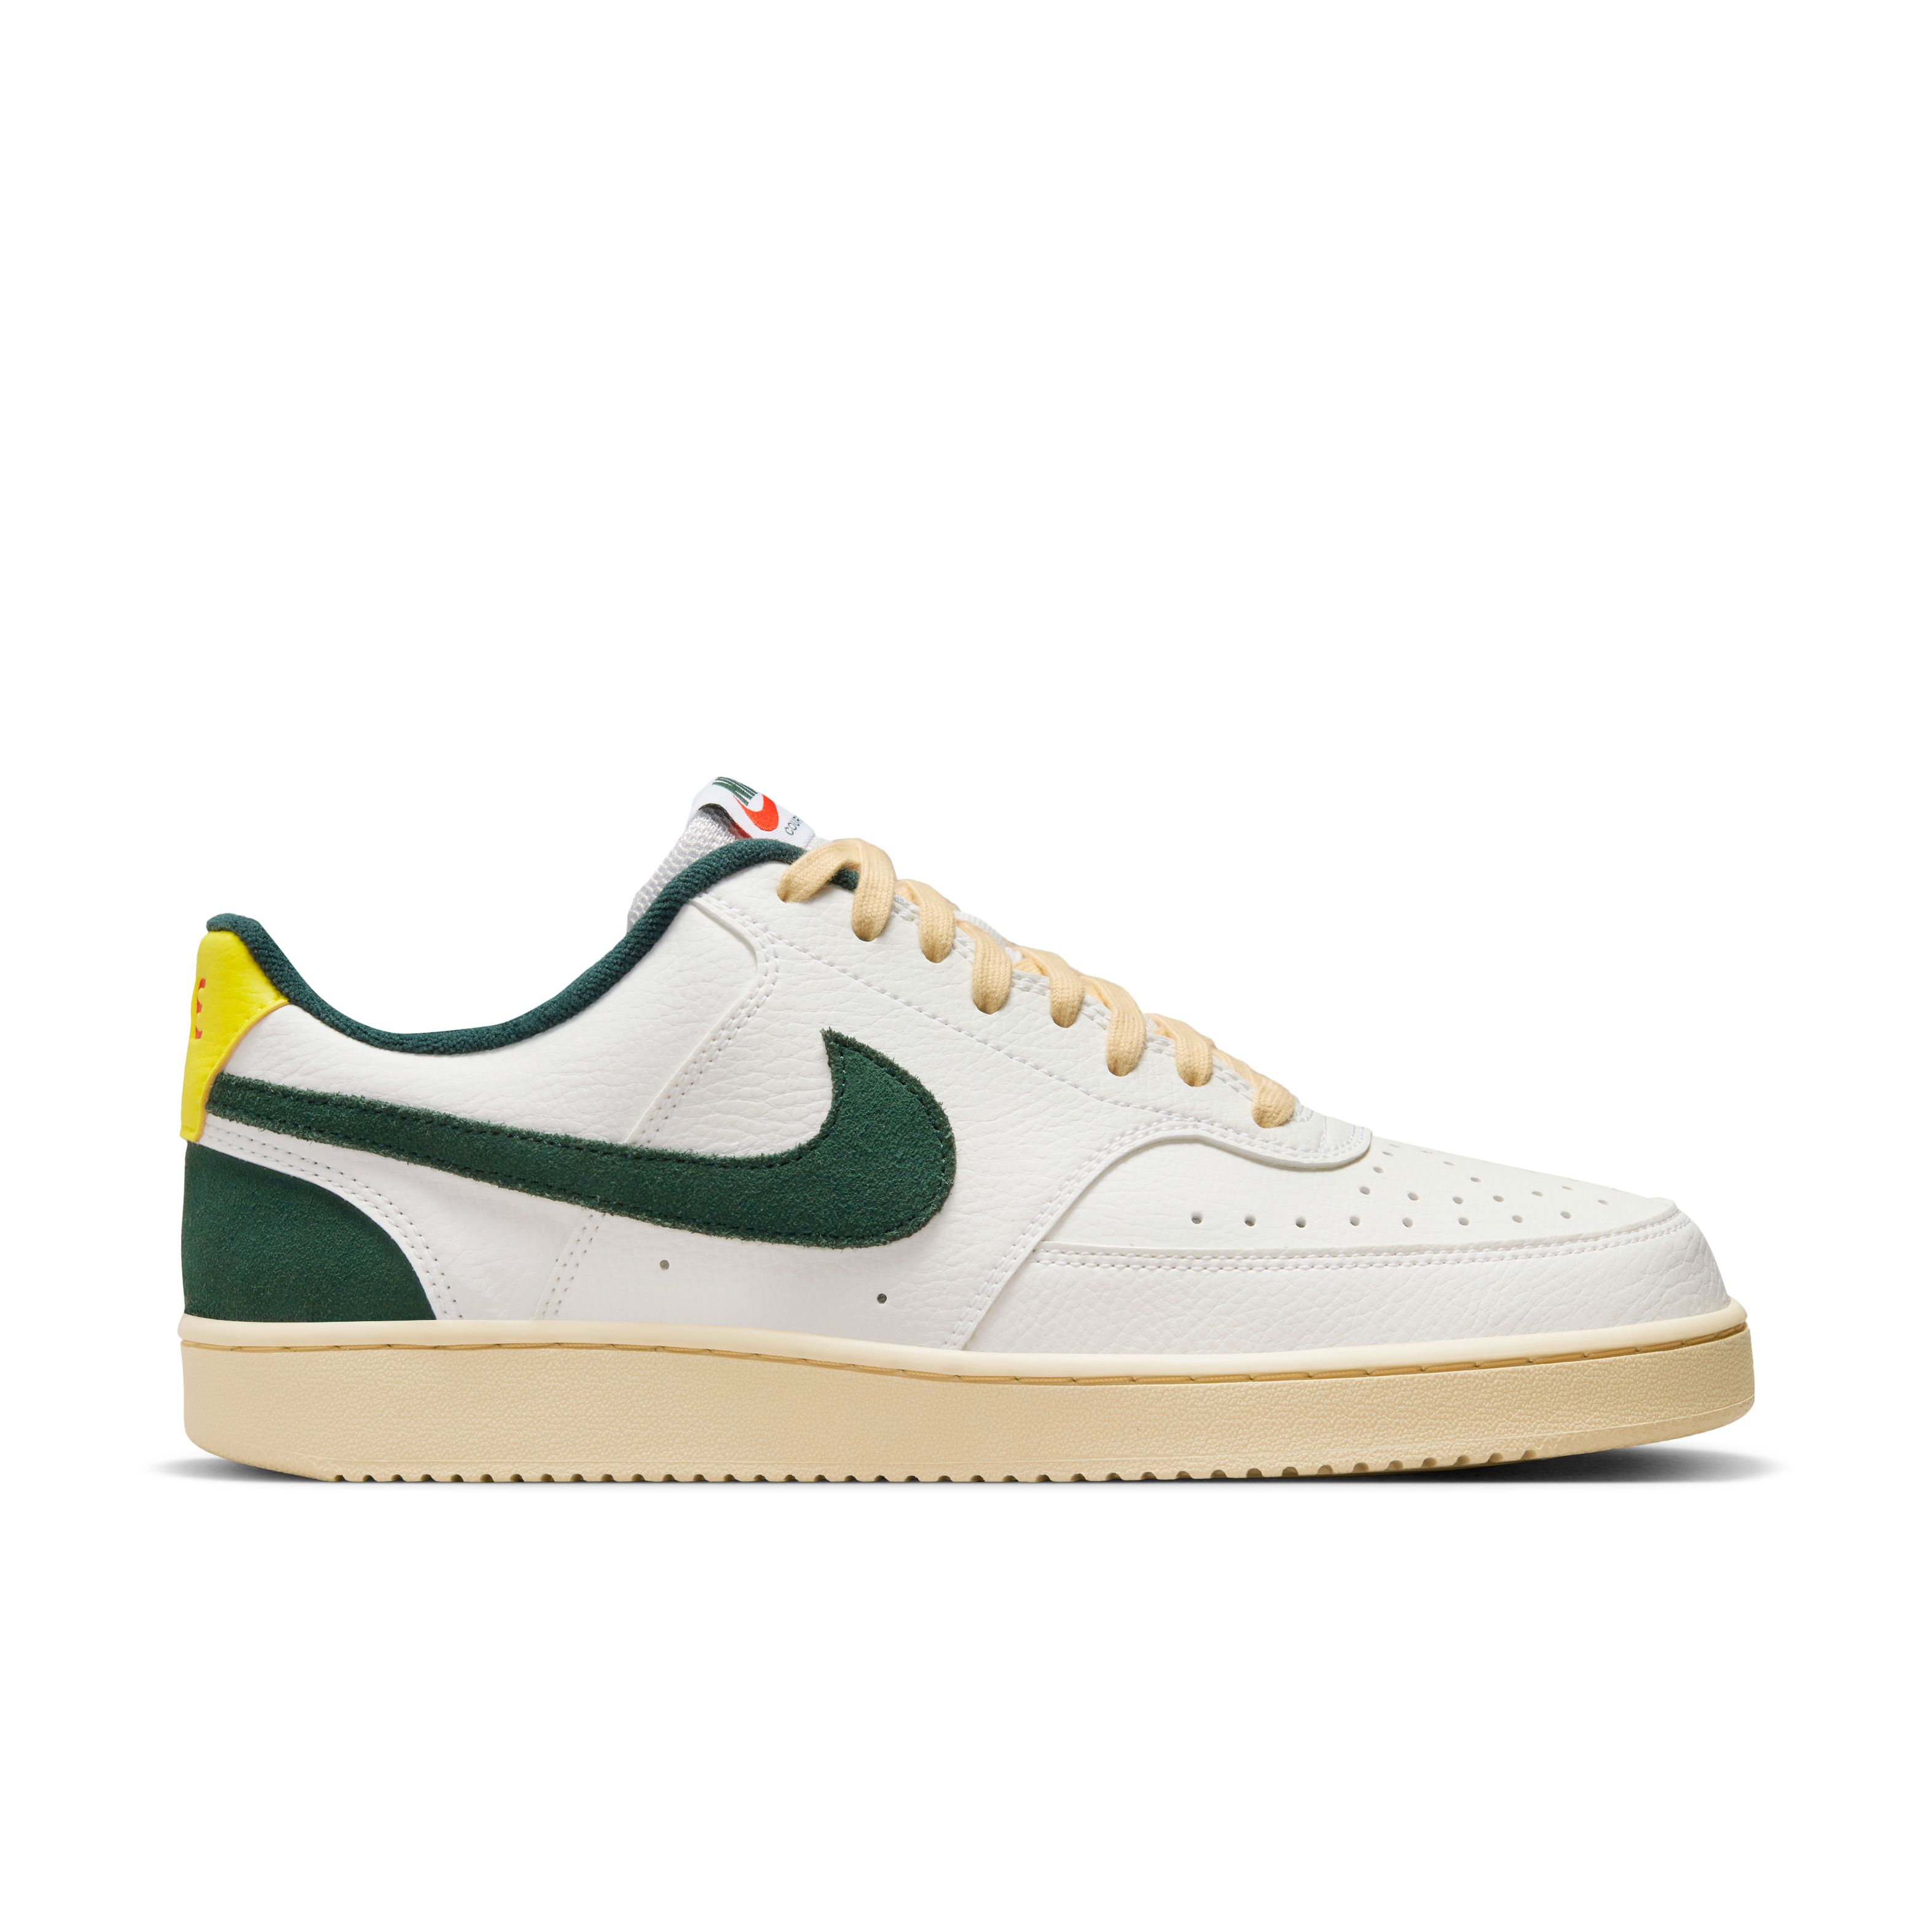 Nike Cout Vision Low heren sneaker - Off White - Maat 42